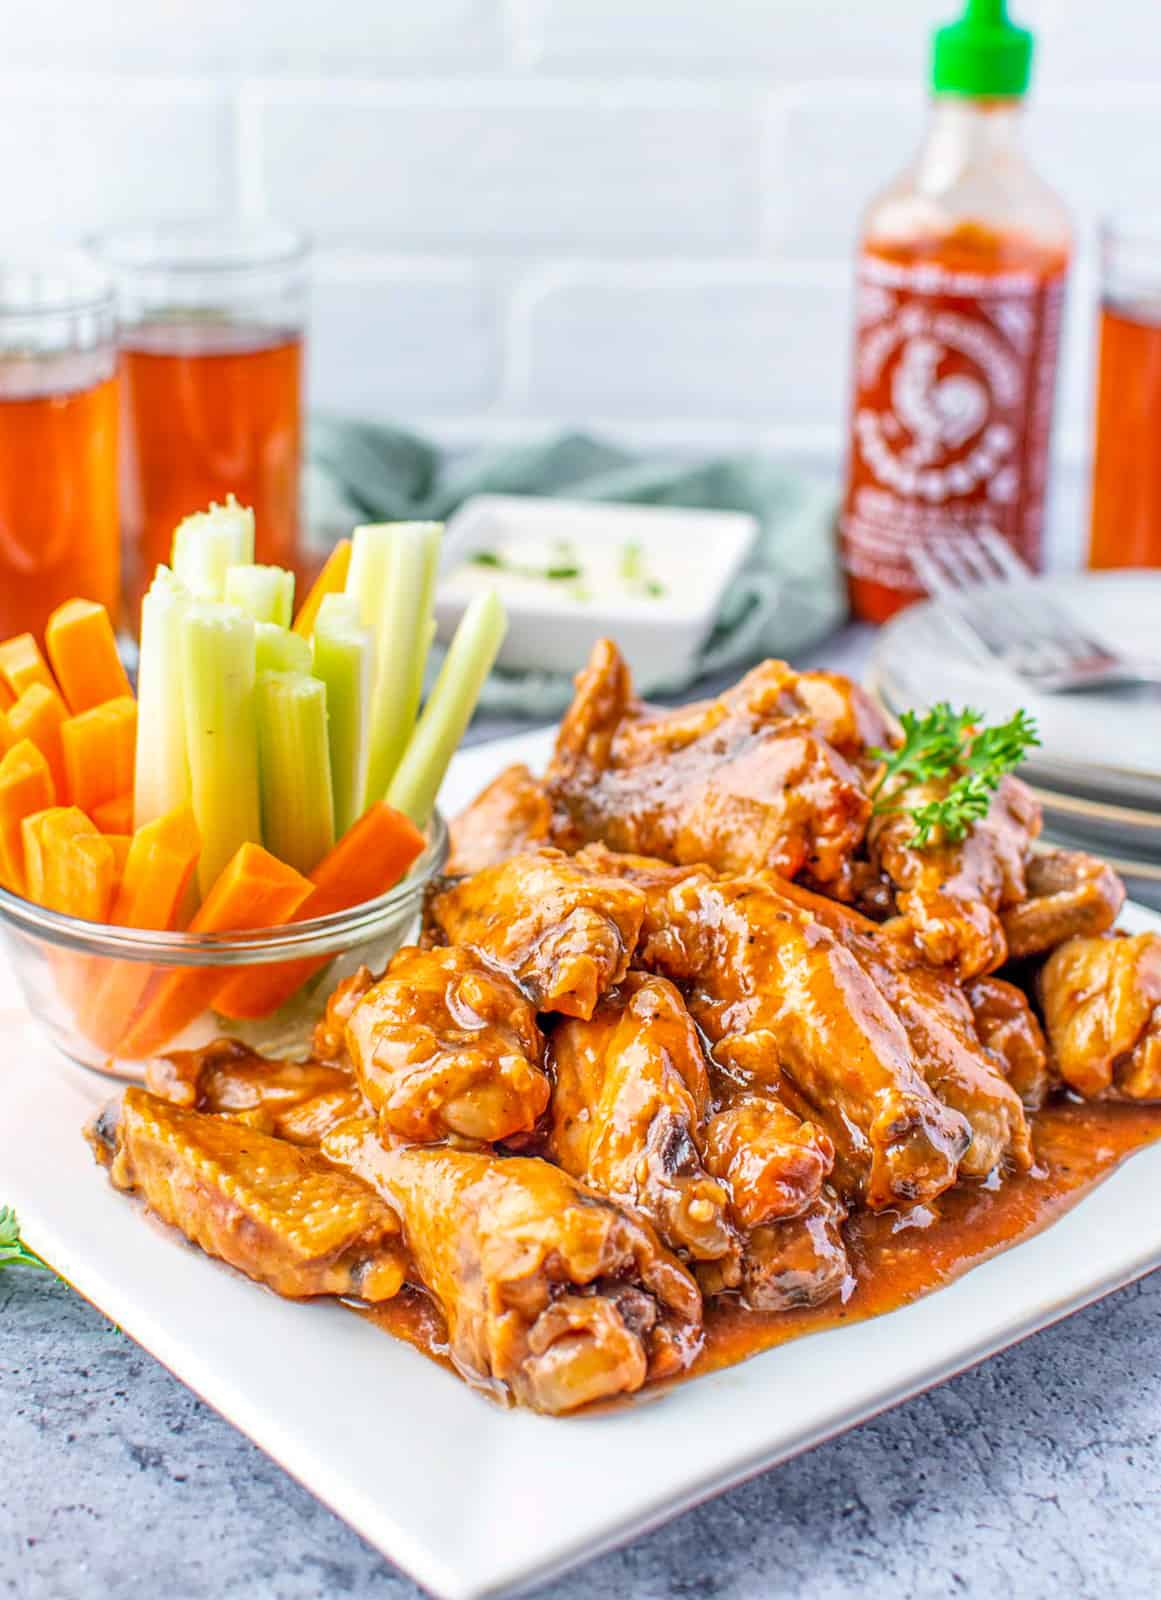 Slow Cooker Chicken Wings on white plate with celery and carrot sticks